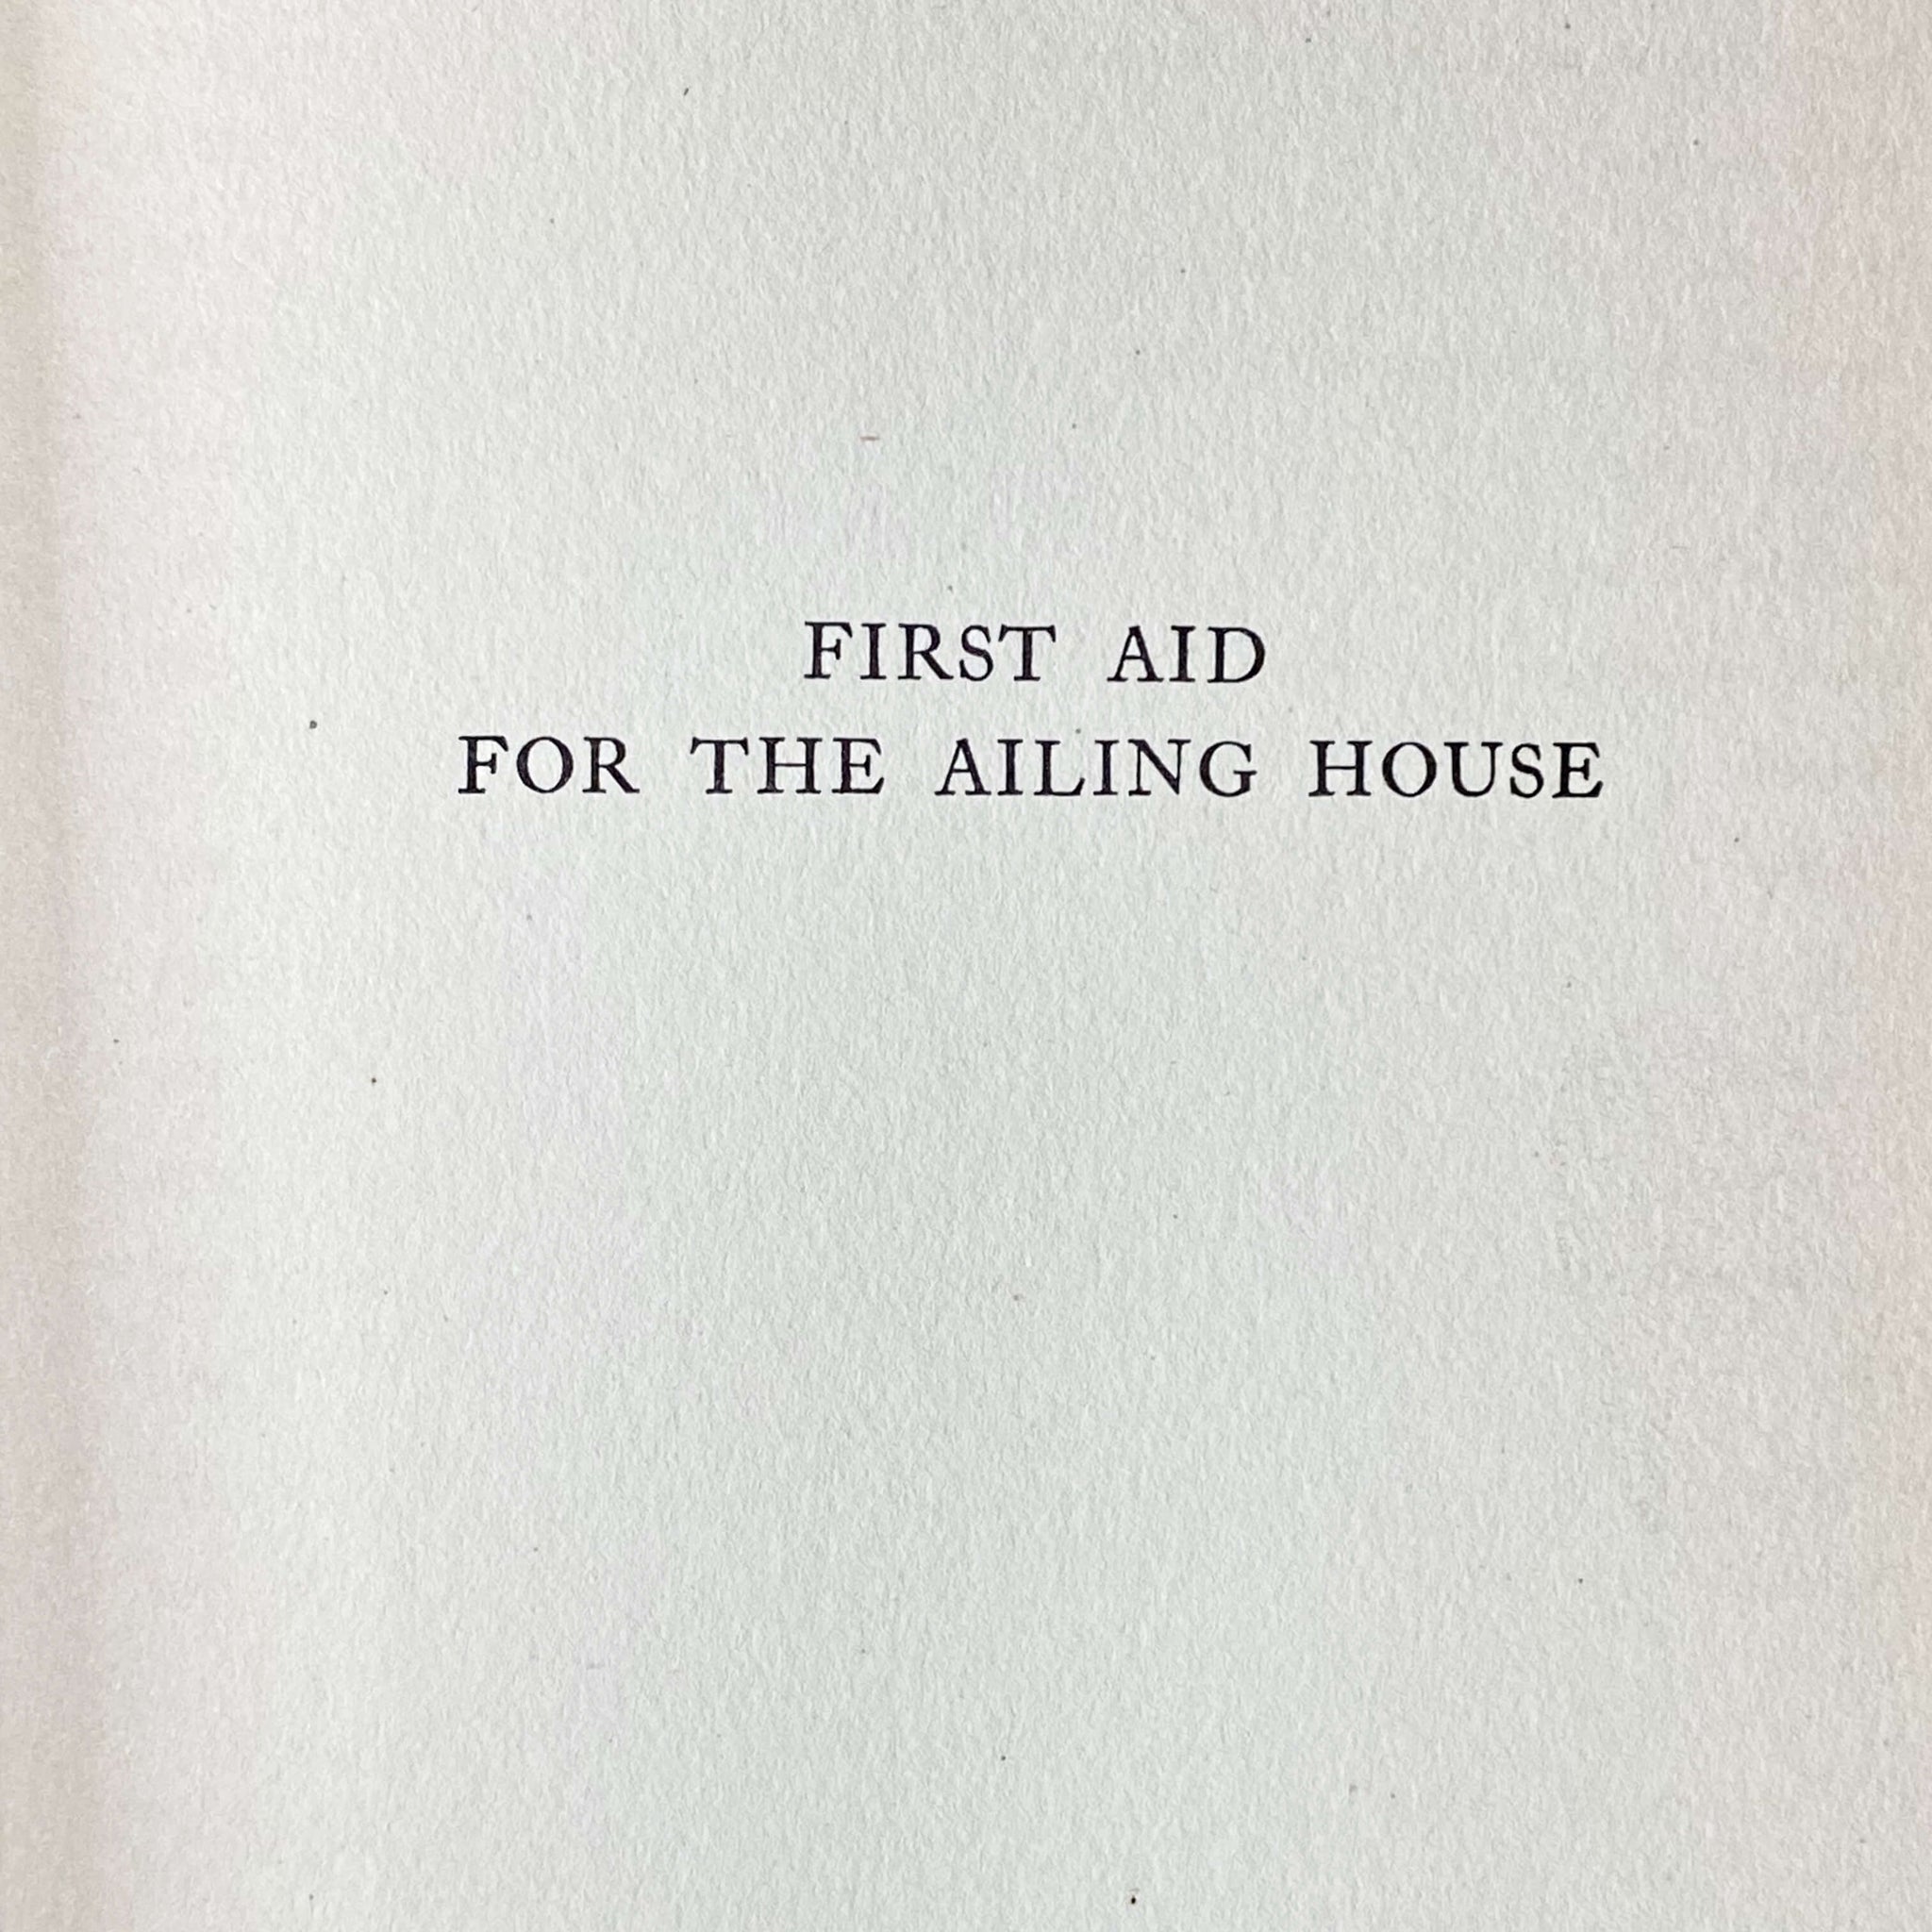 First Aid for The Ailing House by Roger B. Whitman - 1938 Second Edition 5th Printing